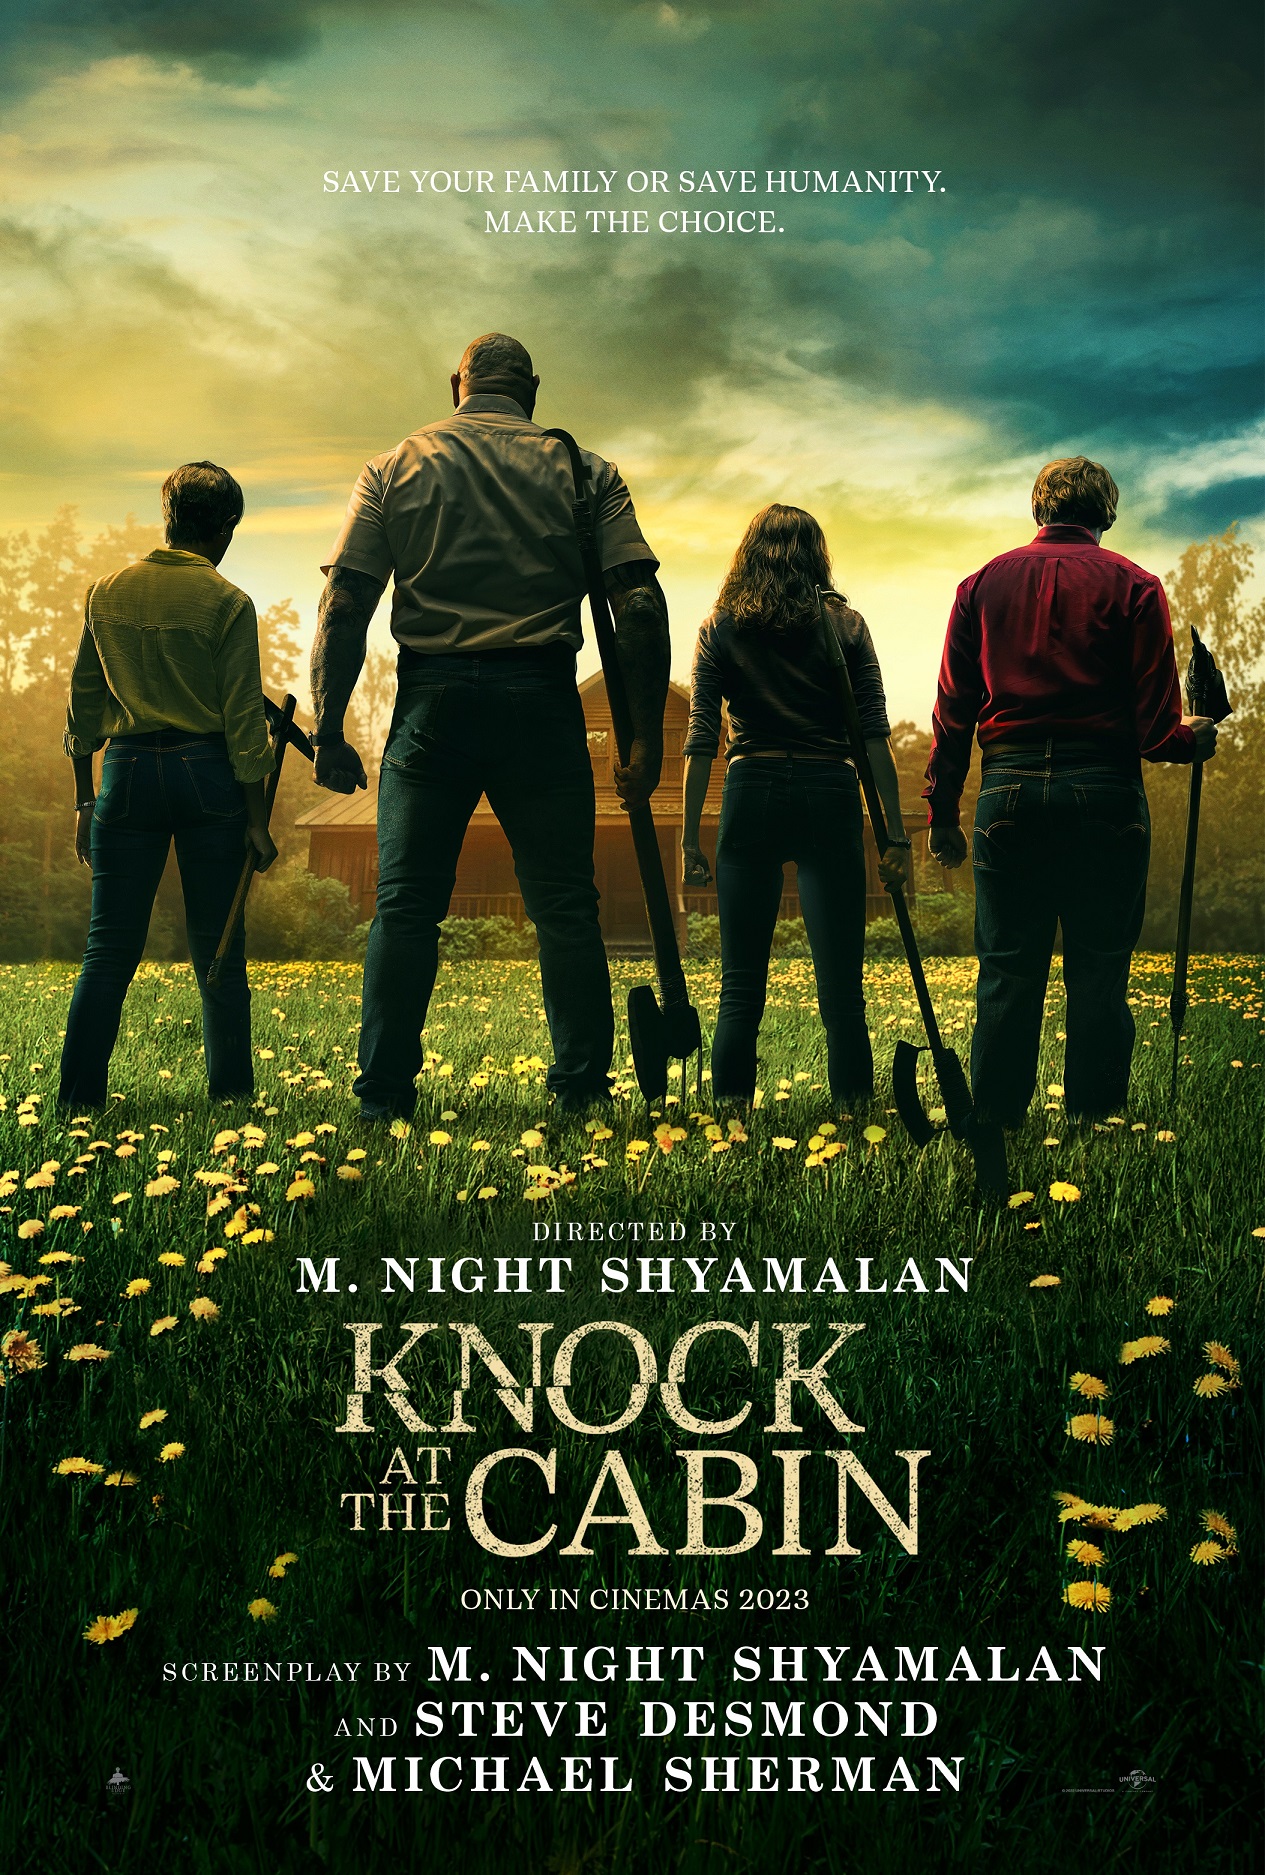 'Knock At The Cabin' poster. Image: Universal Pictures / Supplied